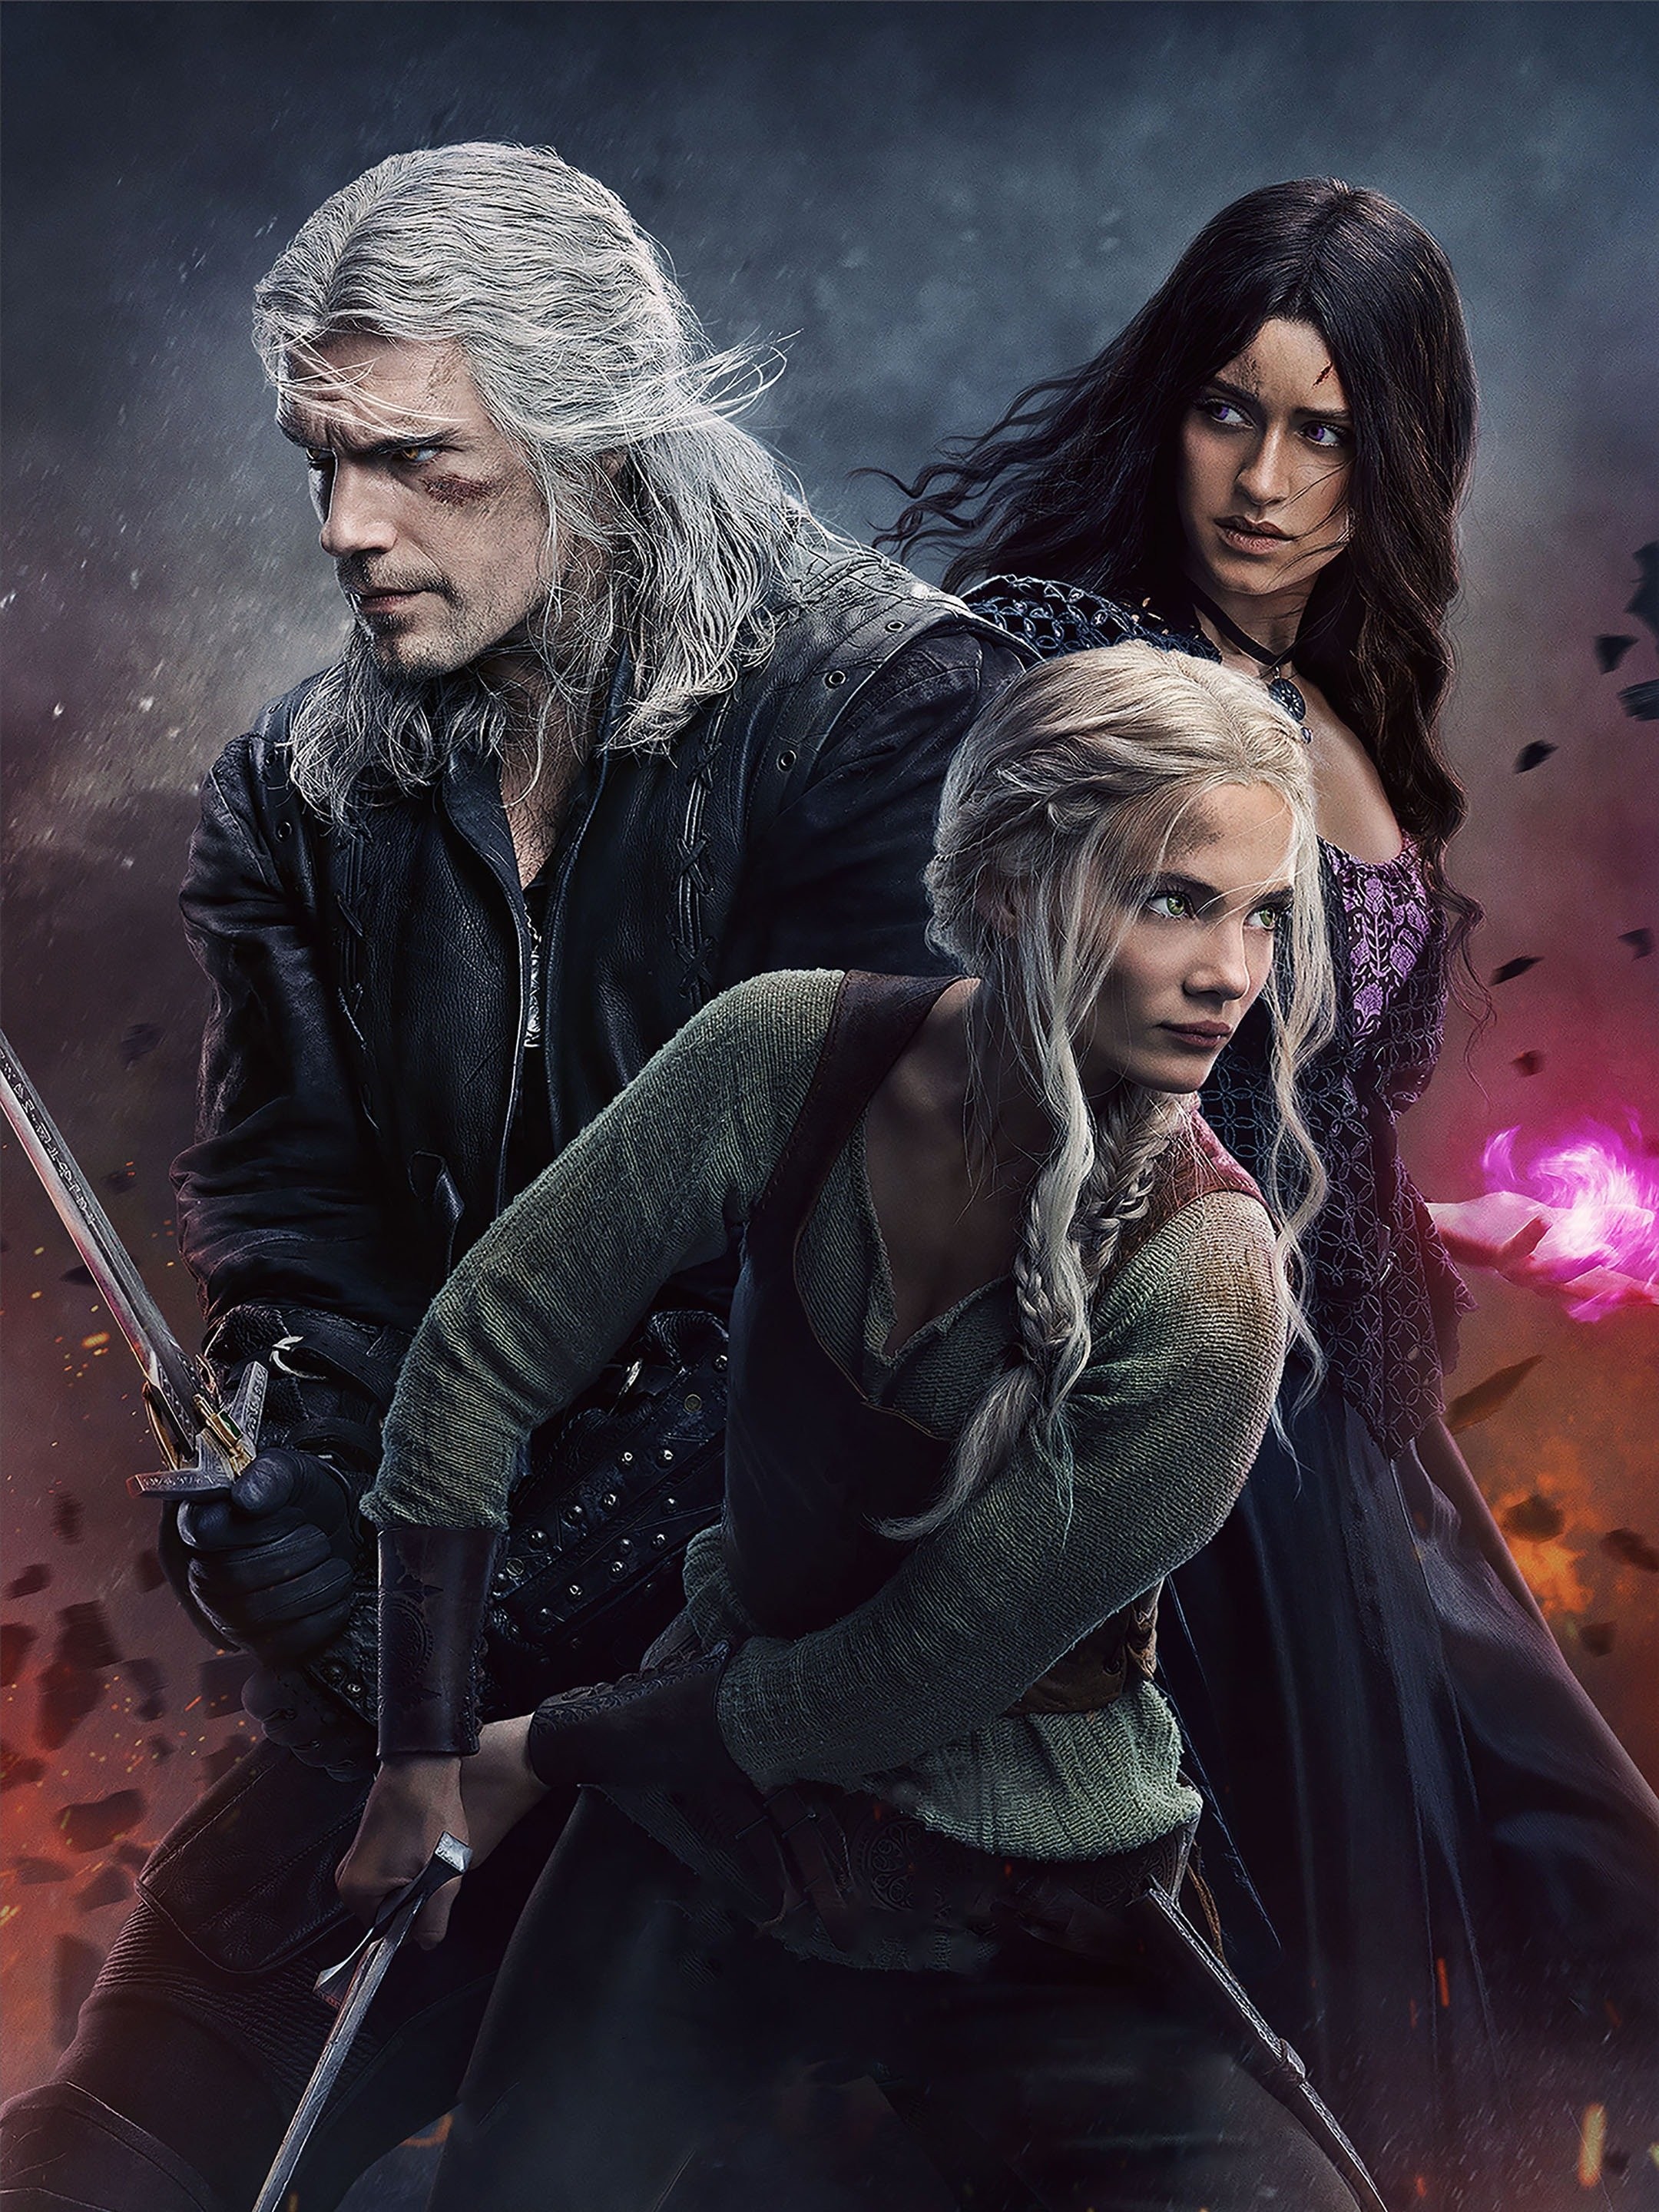 The Witcher (Video Game 2007) - IMDb